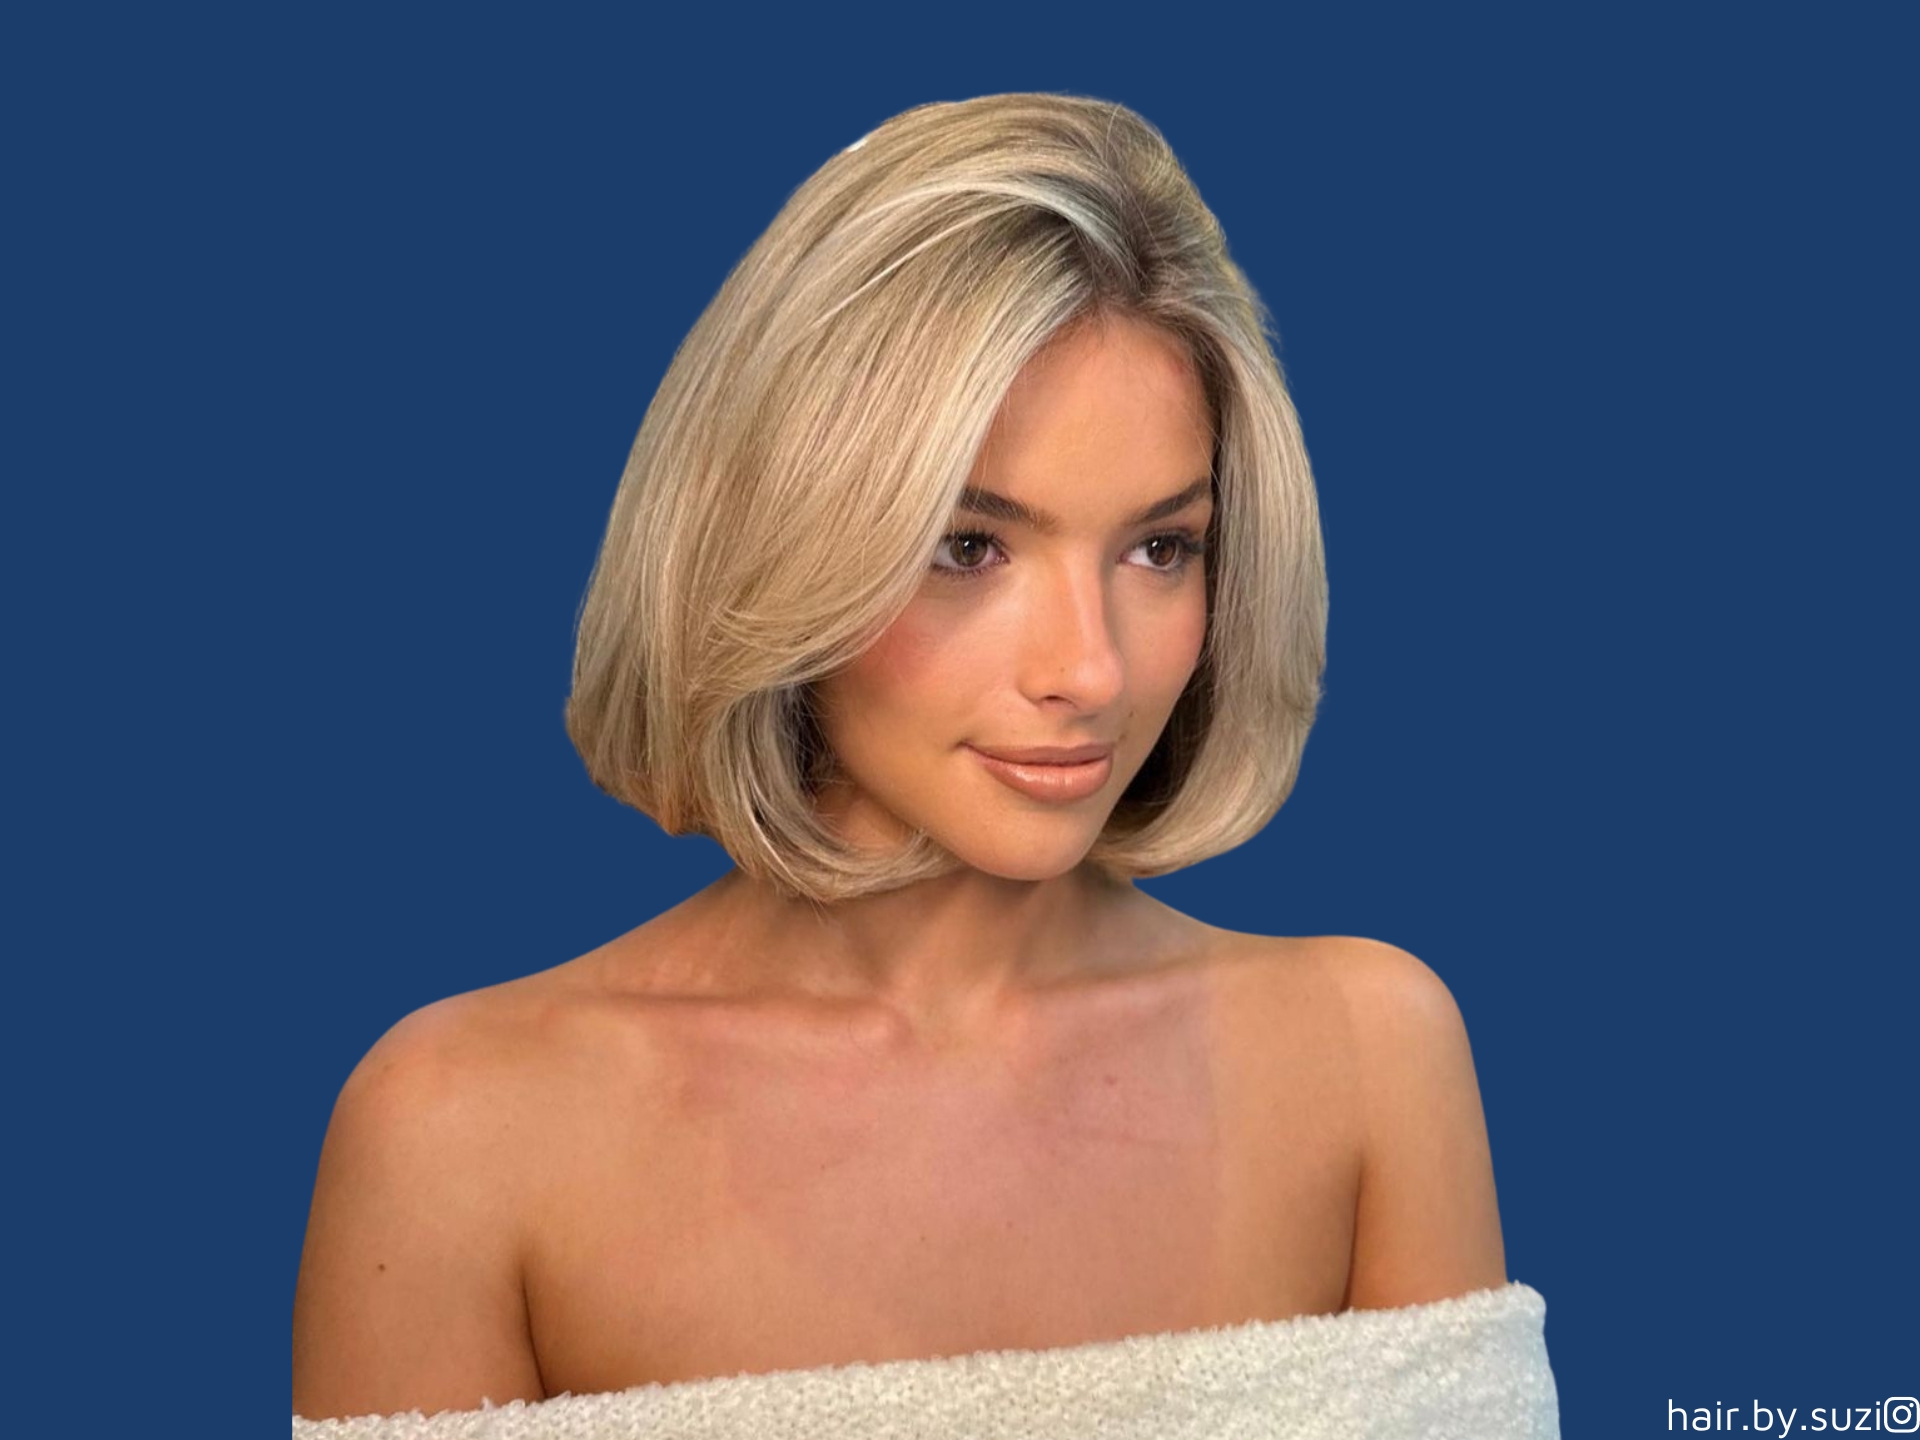 20 Old Money Bob Hair Inspo Styles That Are Pure Fire